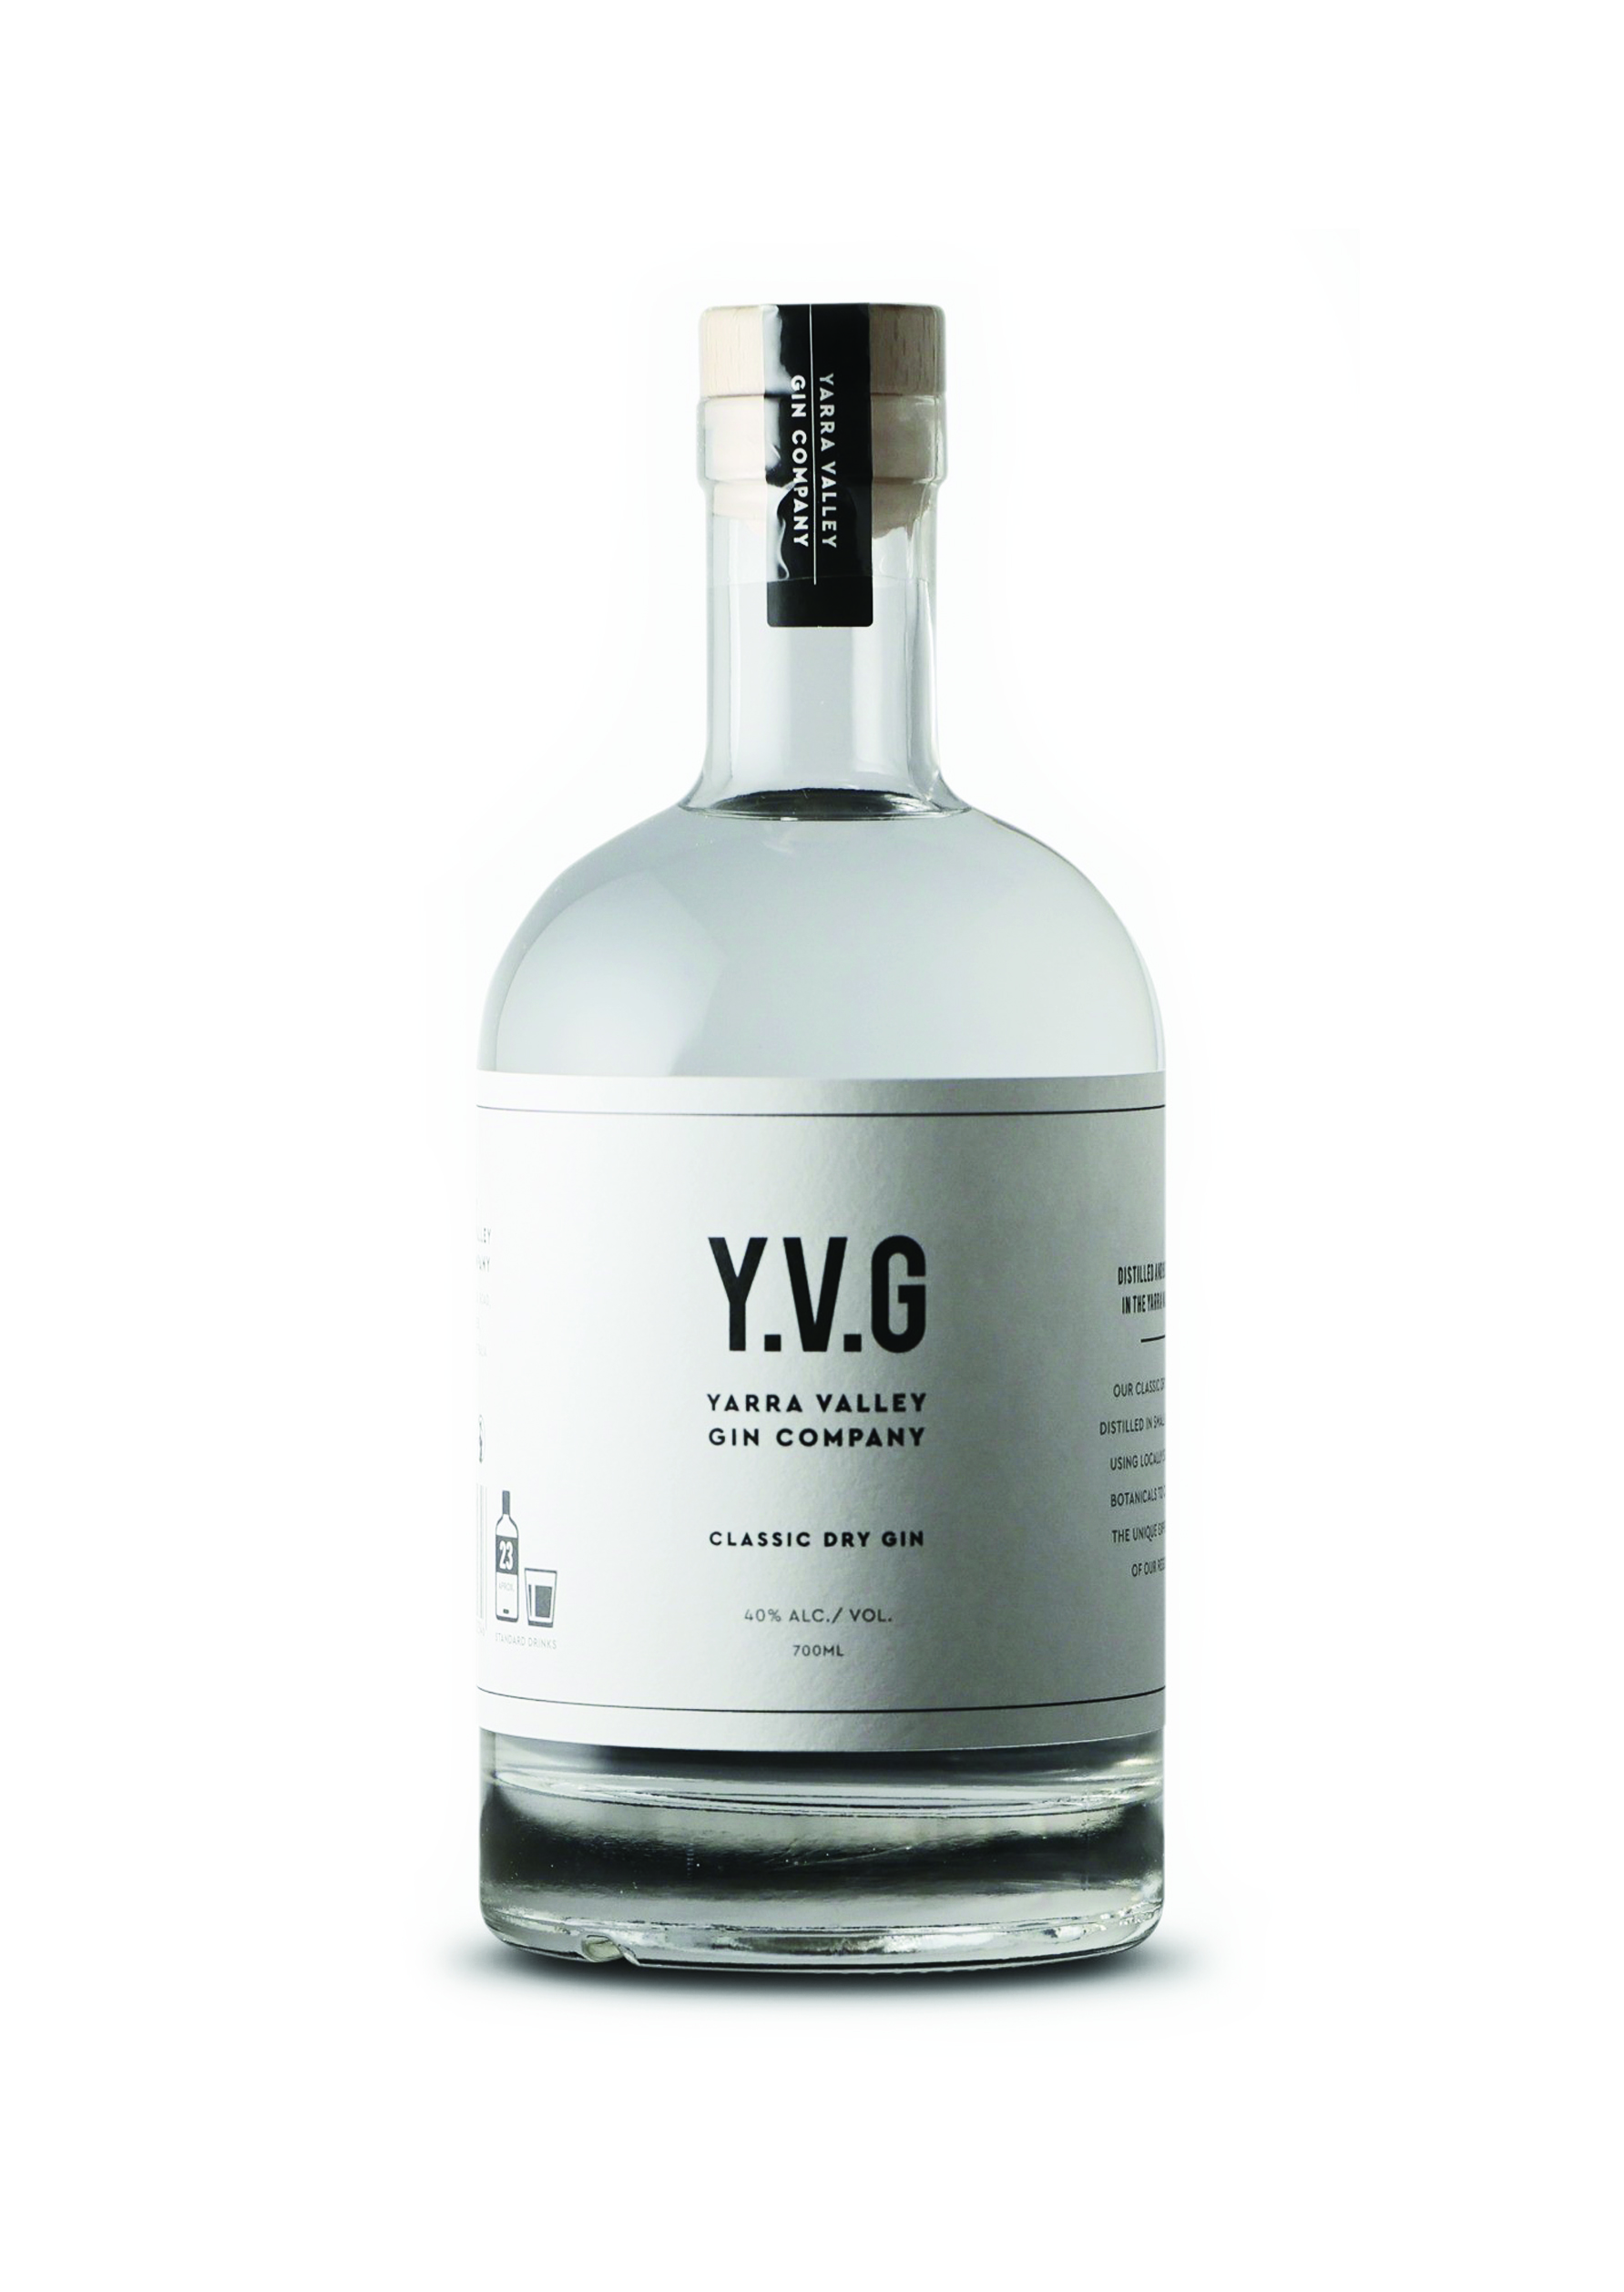 Yarra Valley Gin Company Brand Identity and Packaging Design Studio Mimi Moon